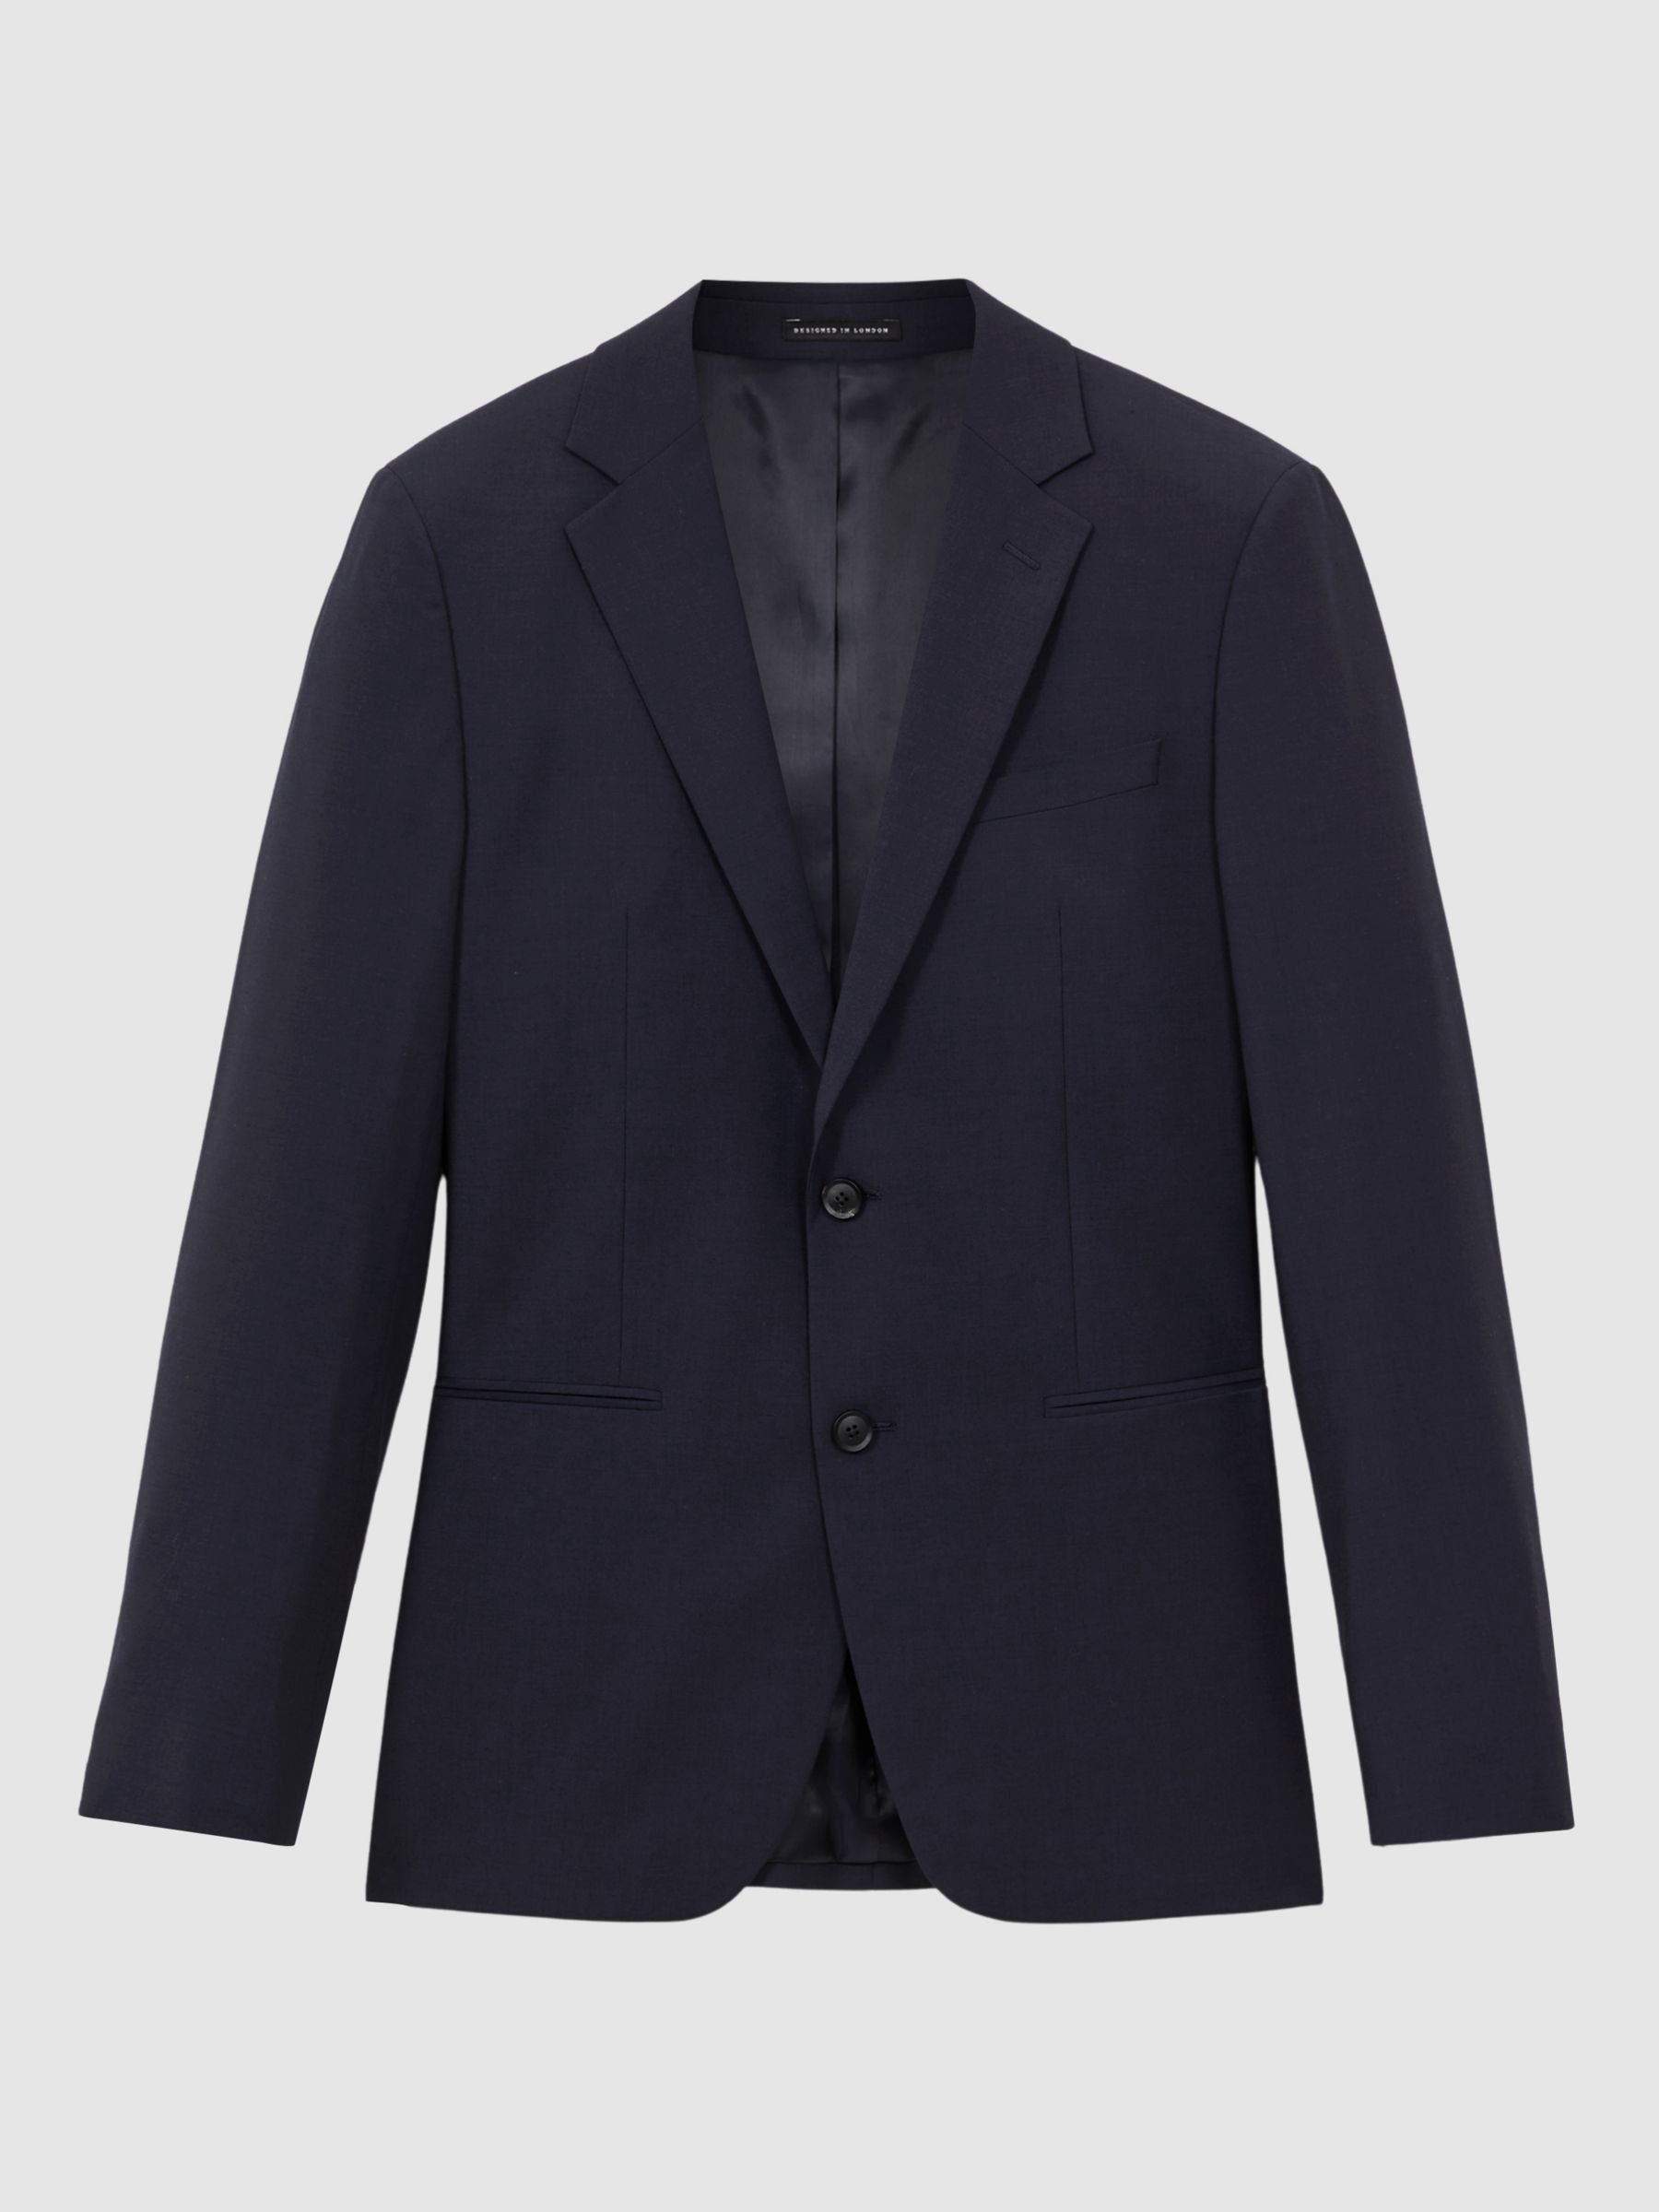 Reiss Hope Wool Blend Tailored Fit Suit Jacket, Navy, 34R